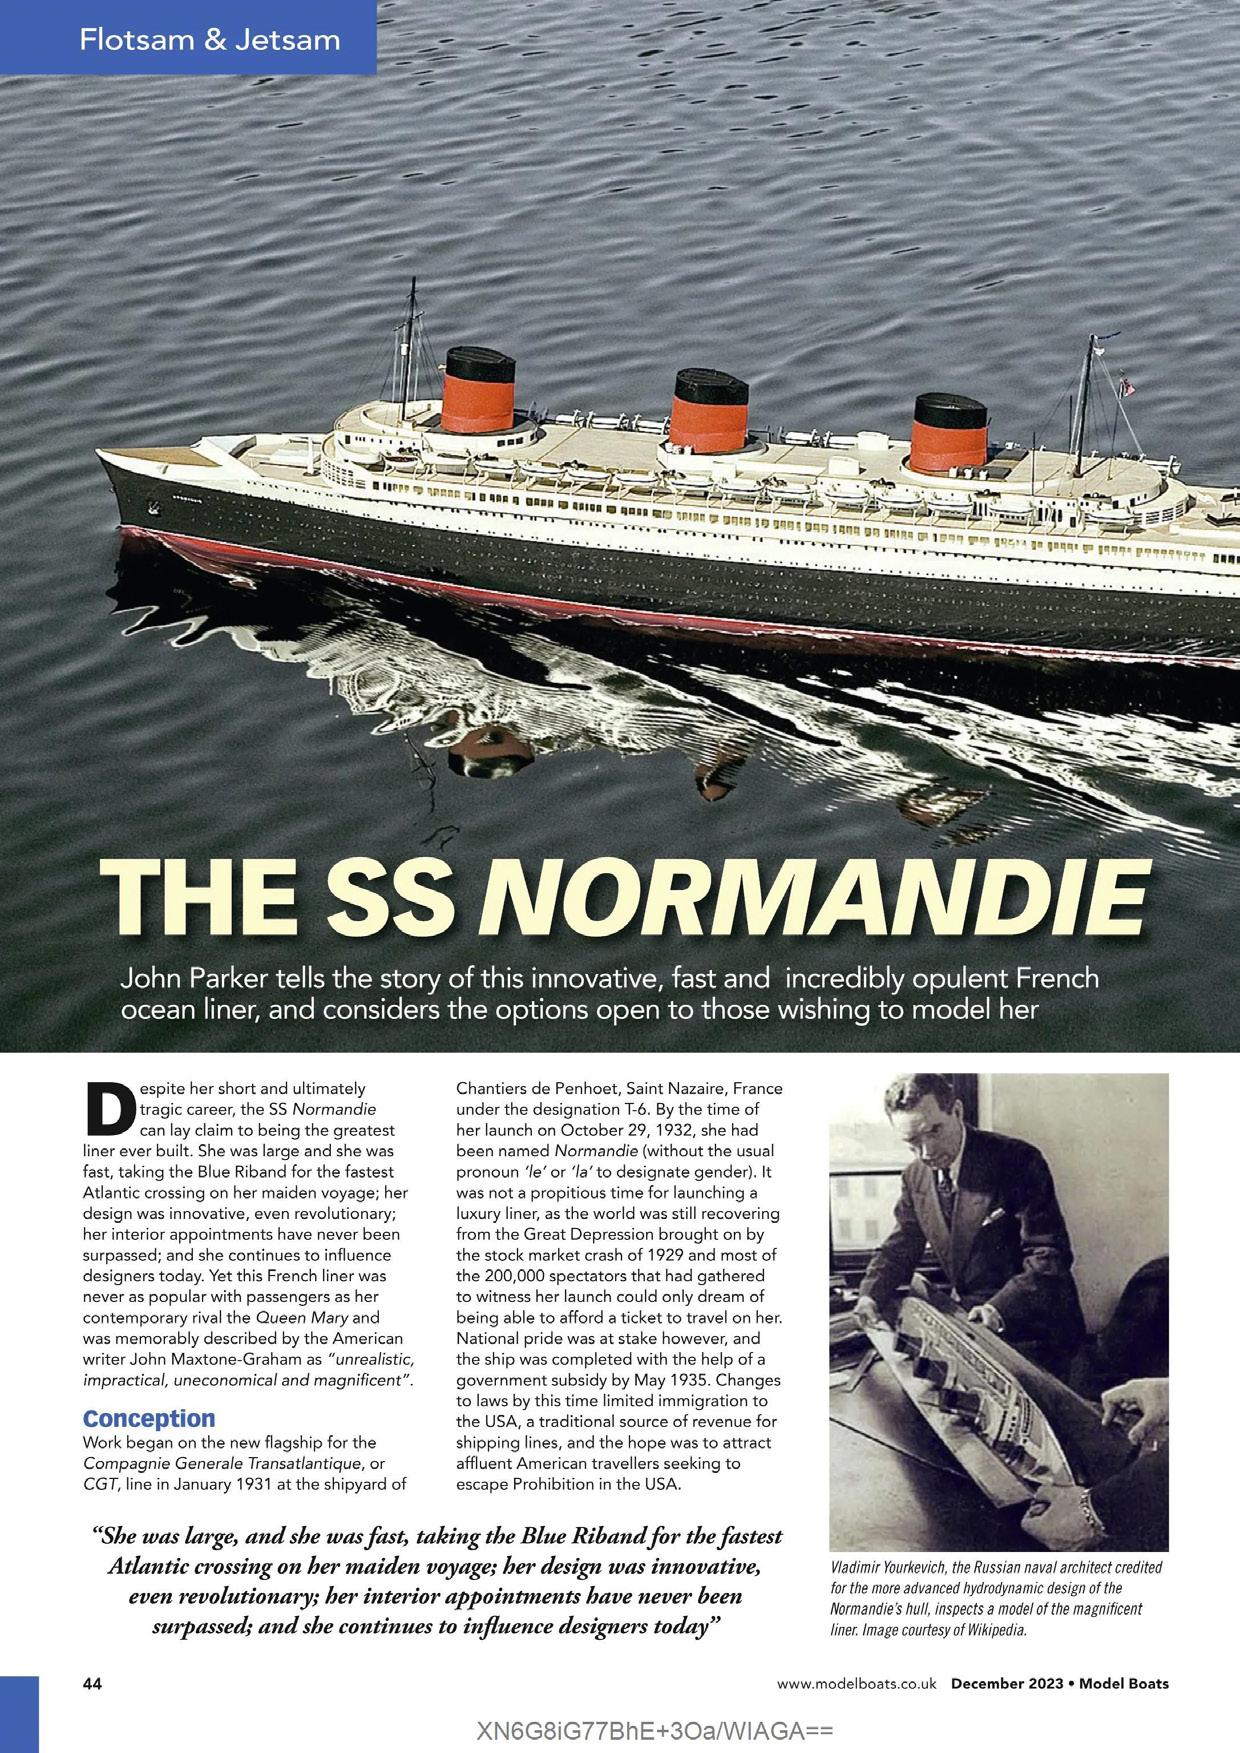 Normandie by model boats page 1